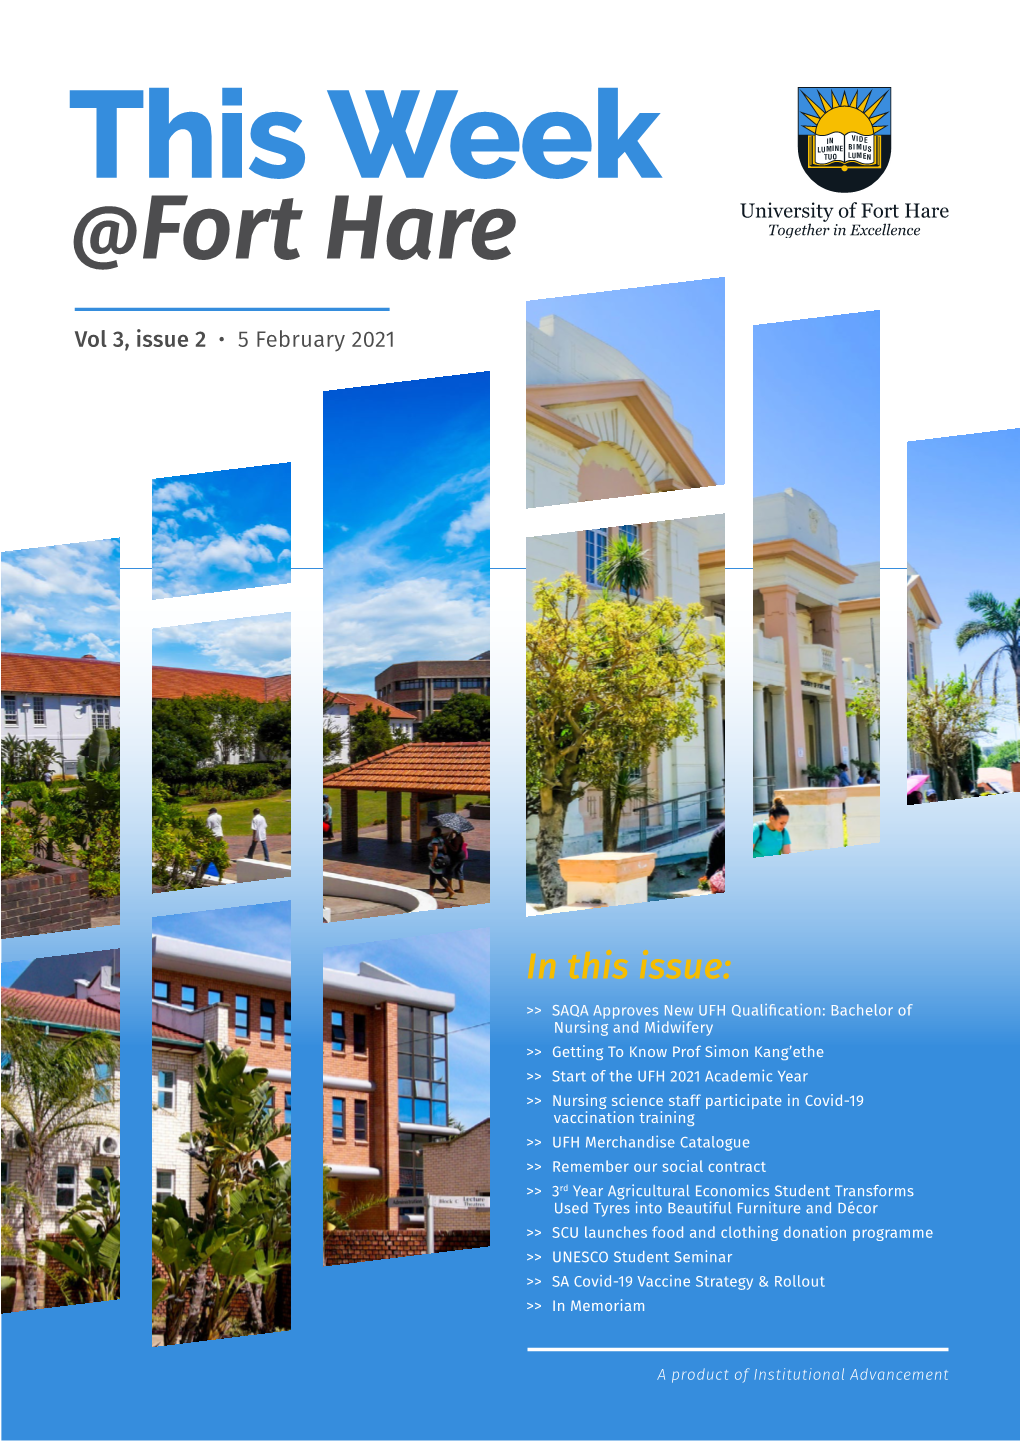 This Week @Fort Hare Vol 3 Issue 2